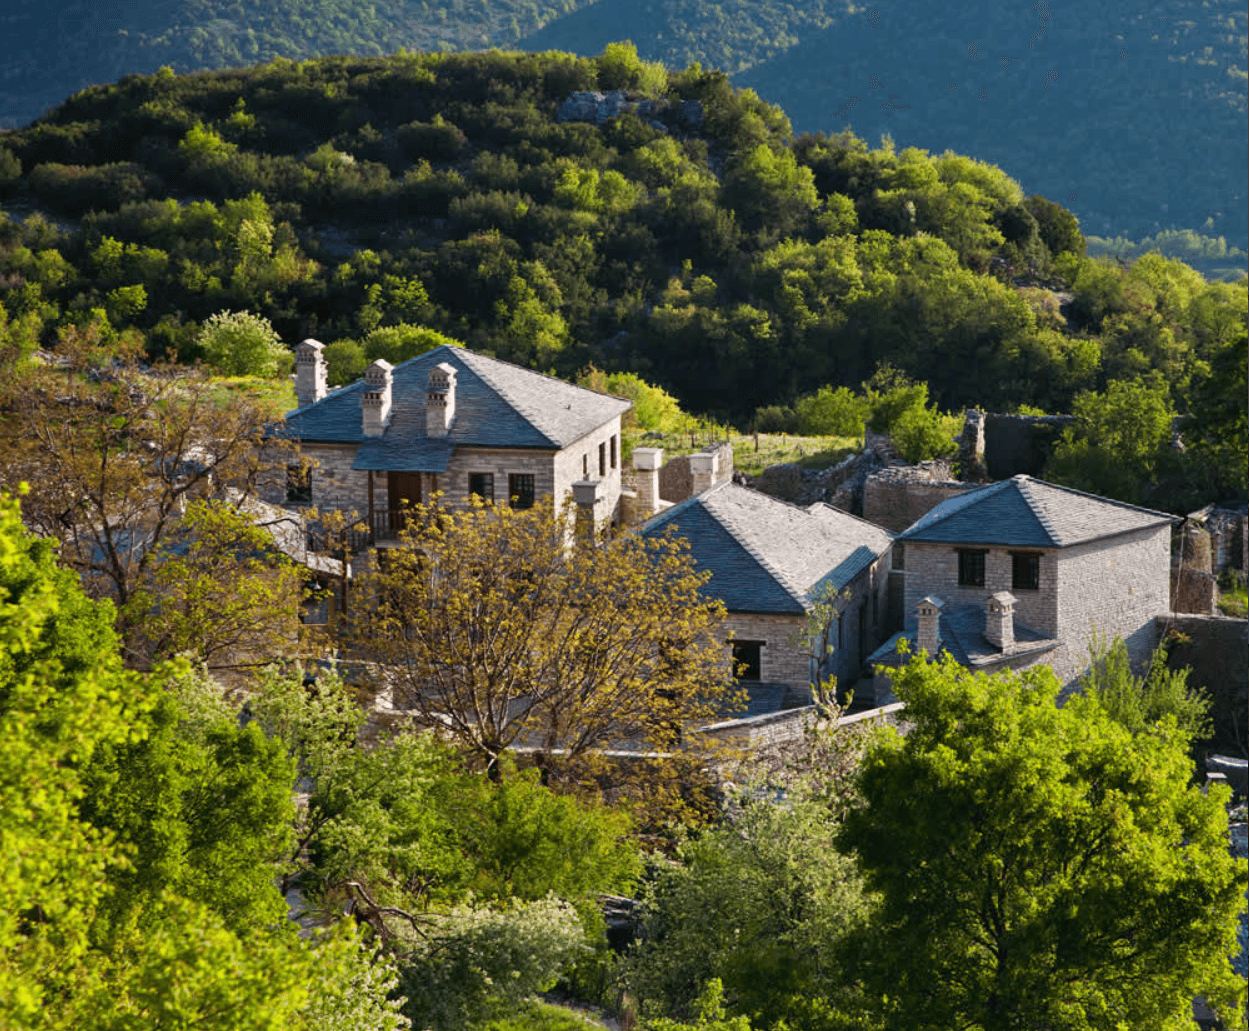 Art Hotel - Newly built Traditional Stone Guest House in Zagori, part of UNESCO's World Heritage List